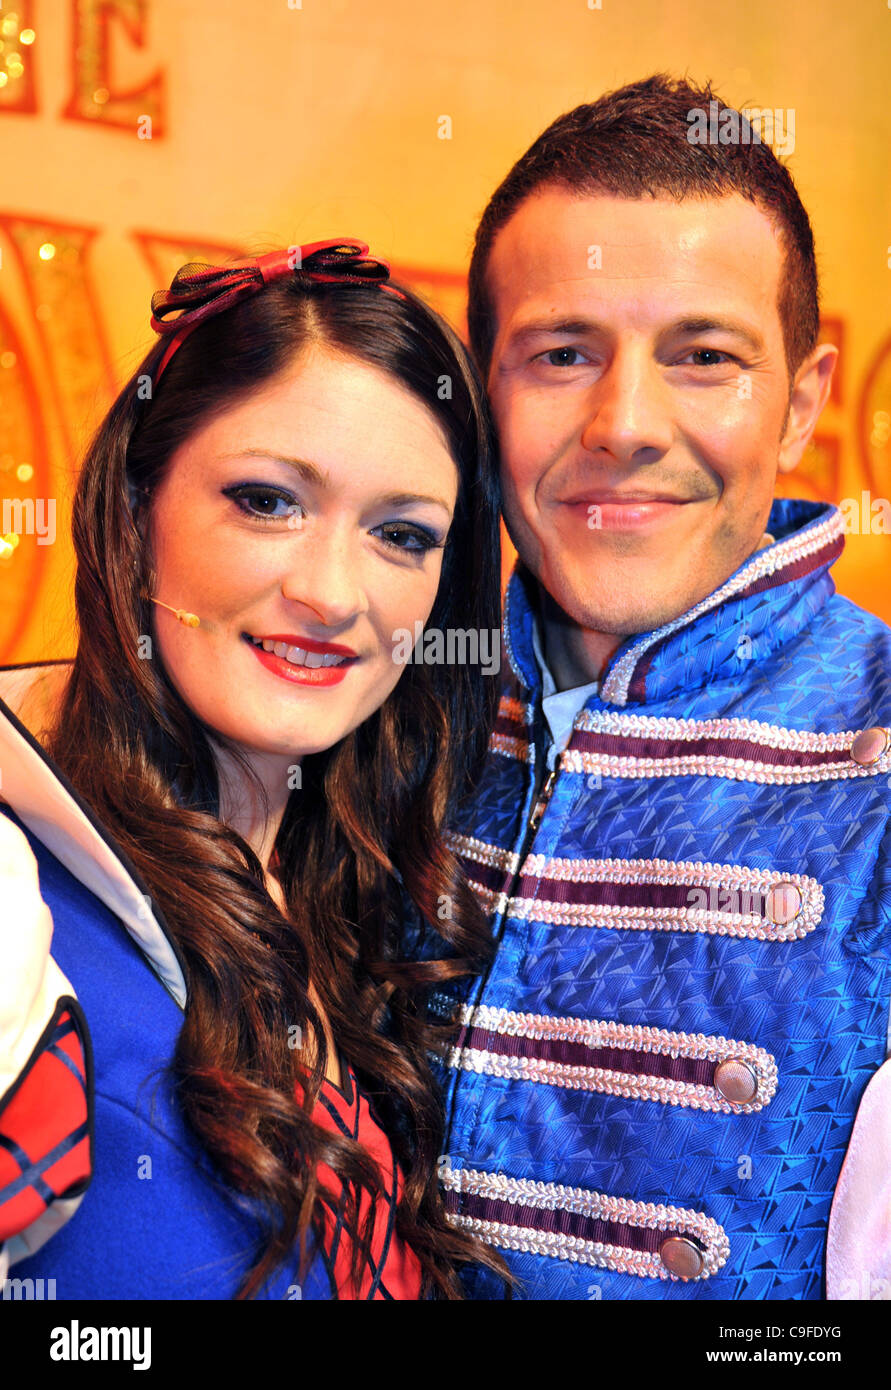 UK, Steps popstar Lee Latchford-Evans is performing in the pantomime Snow White in Weymouth, Dorset. He will be rejoining Steps for a series of concerts in 2012. Pictured with actress Charlotte Steen who plays Snow White.  Picture : Dorset Media Service.  14/12/2011 Stock Photo